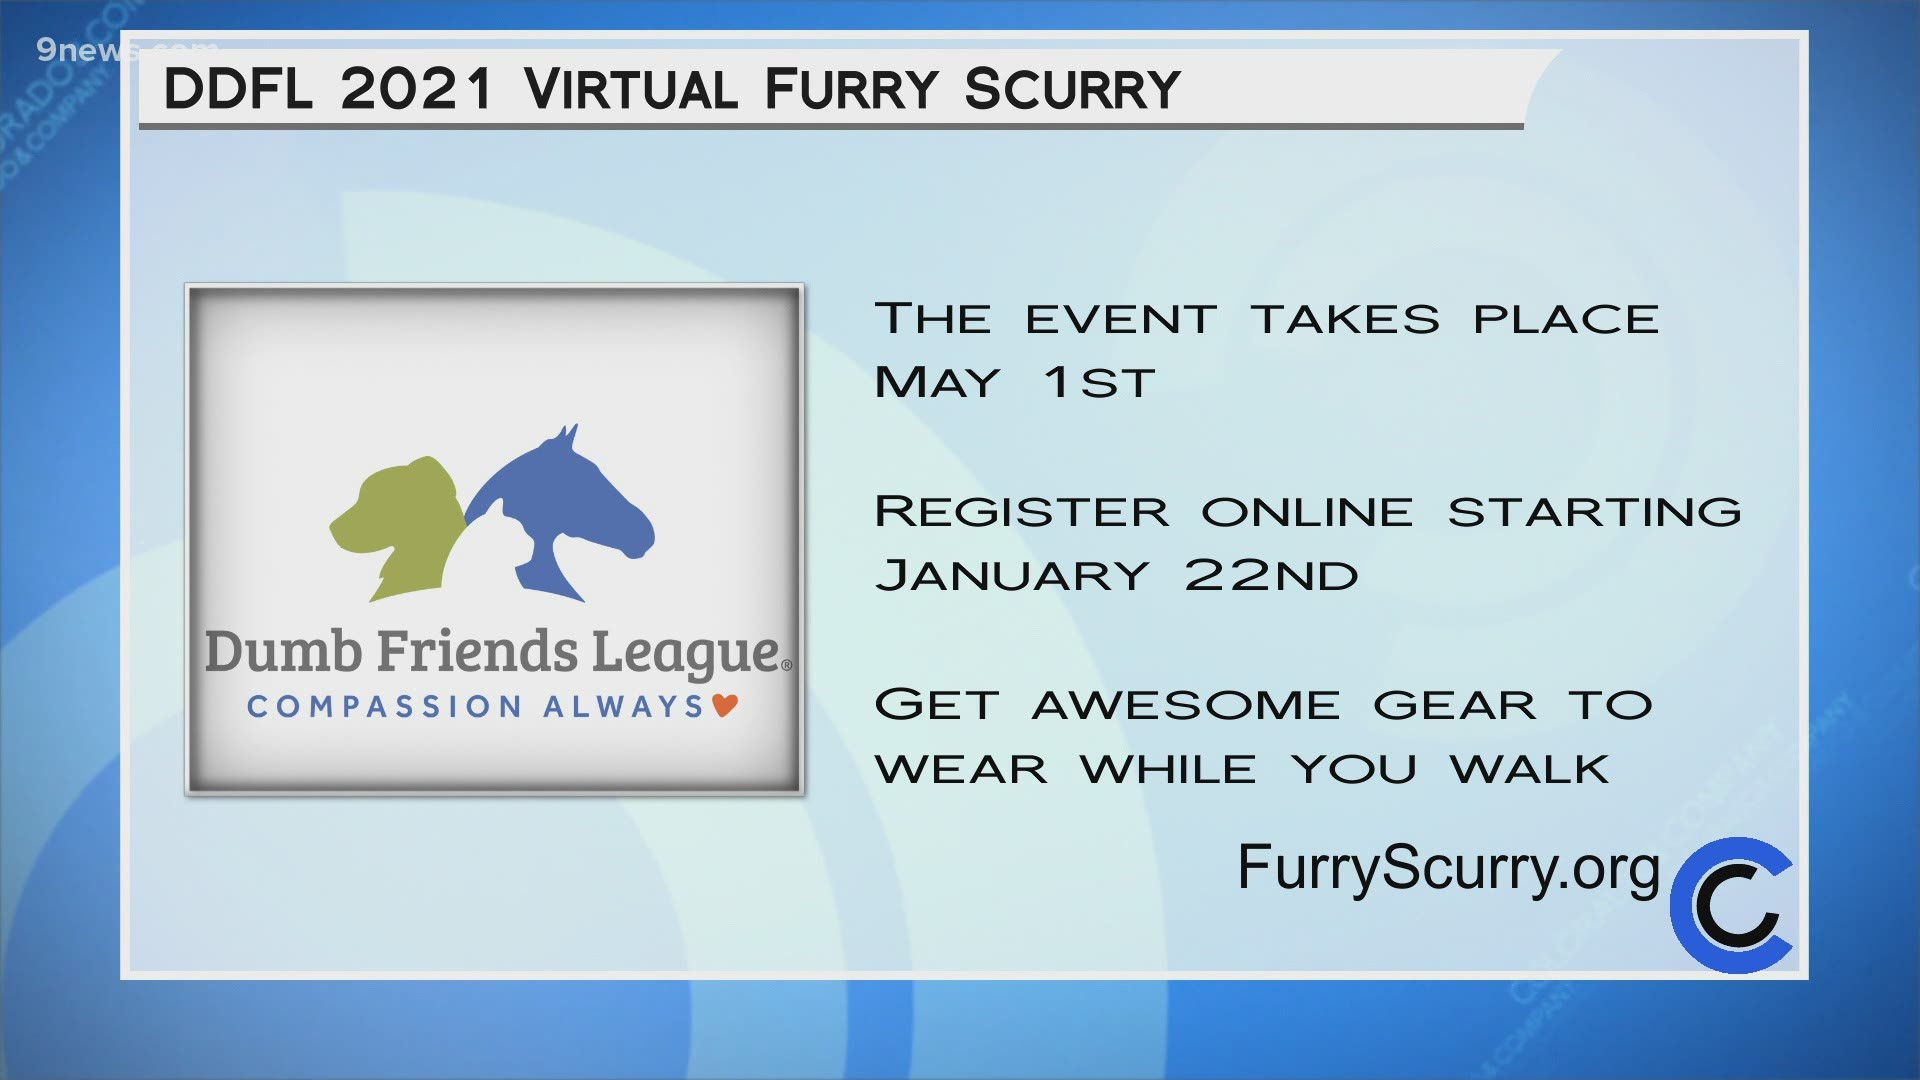 Register online for the Virtual Furry Scurry through February 1st to get the early bird registration fee of just $35. Learn more at FurryScurry.org.